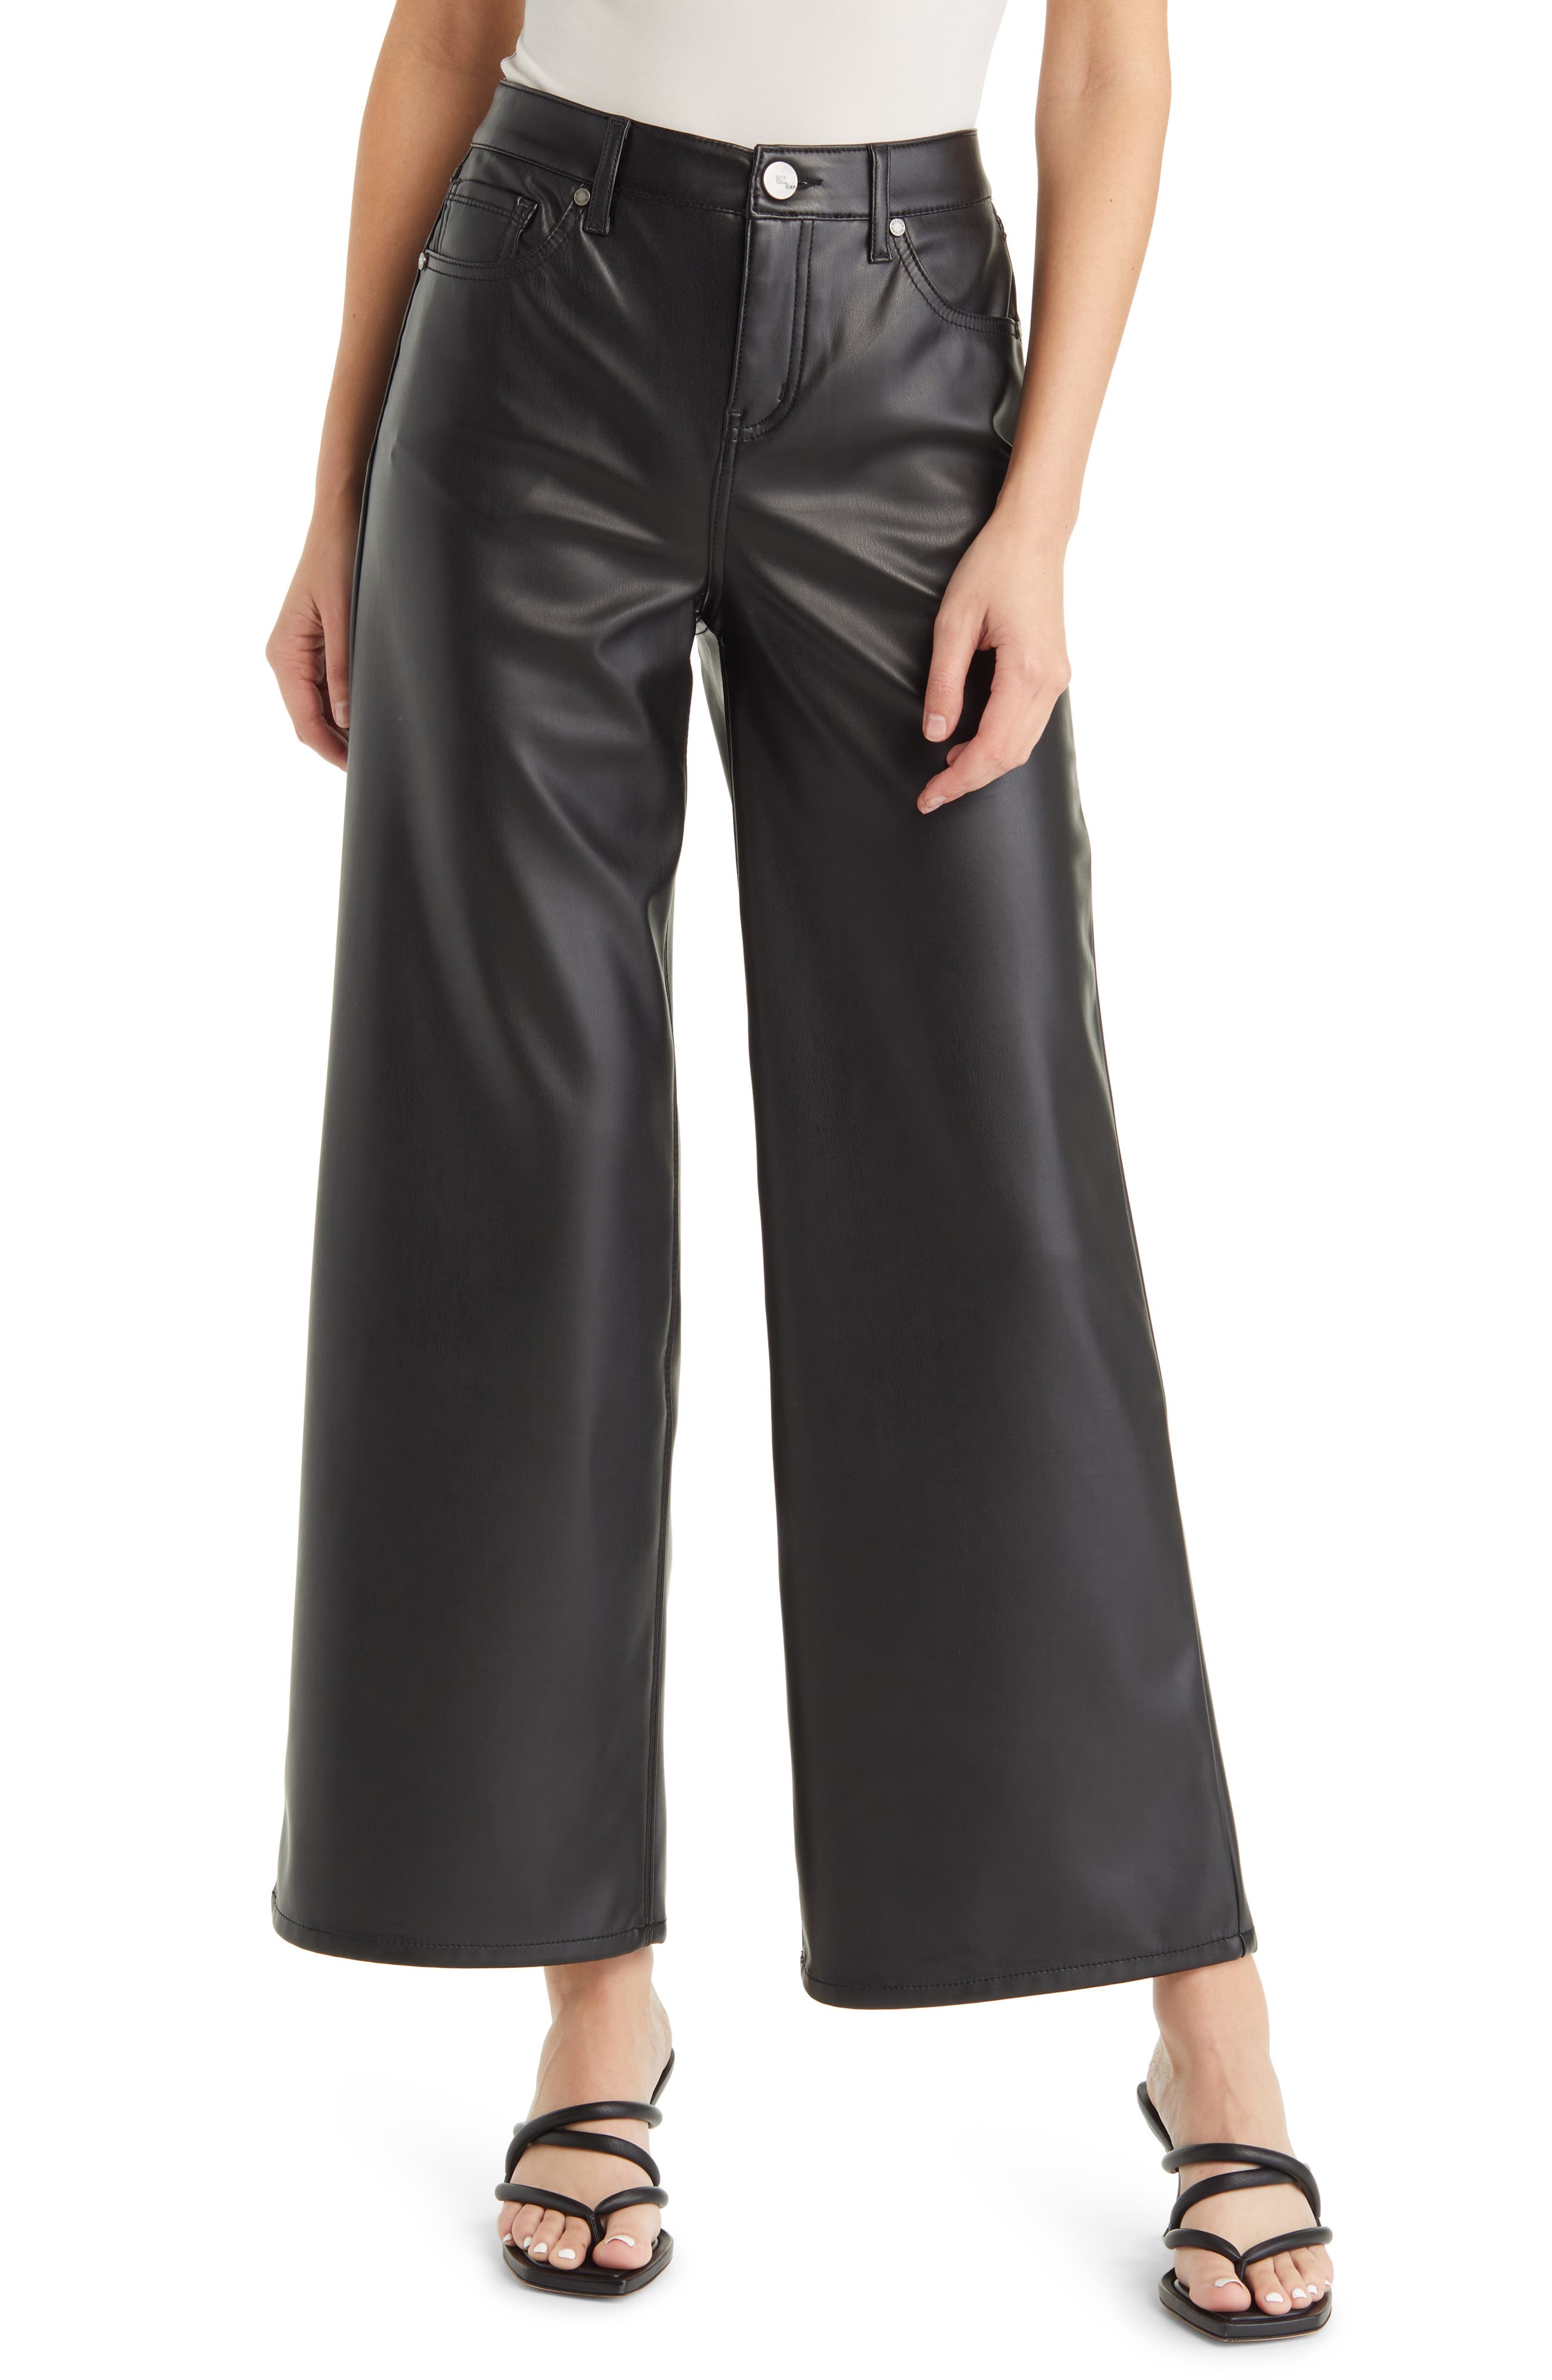 NUTEMPERORナットエンペラー WIDE PU LEATHER PANTS | aventueras.ch